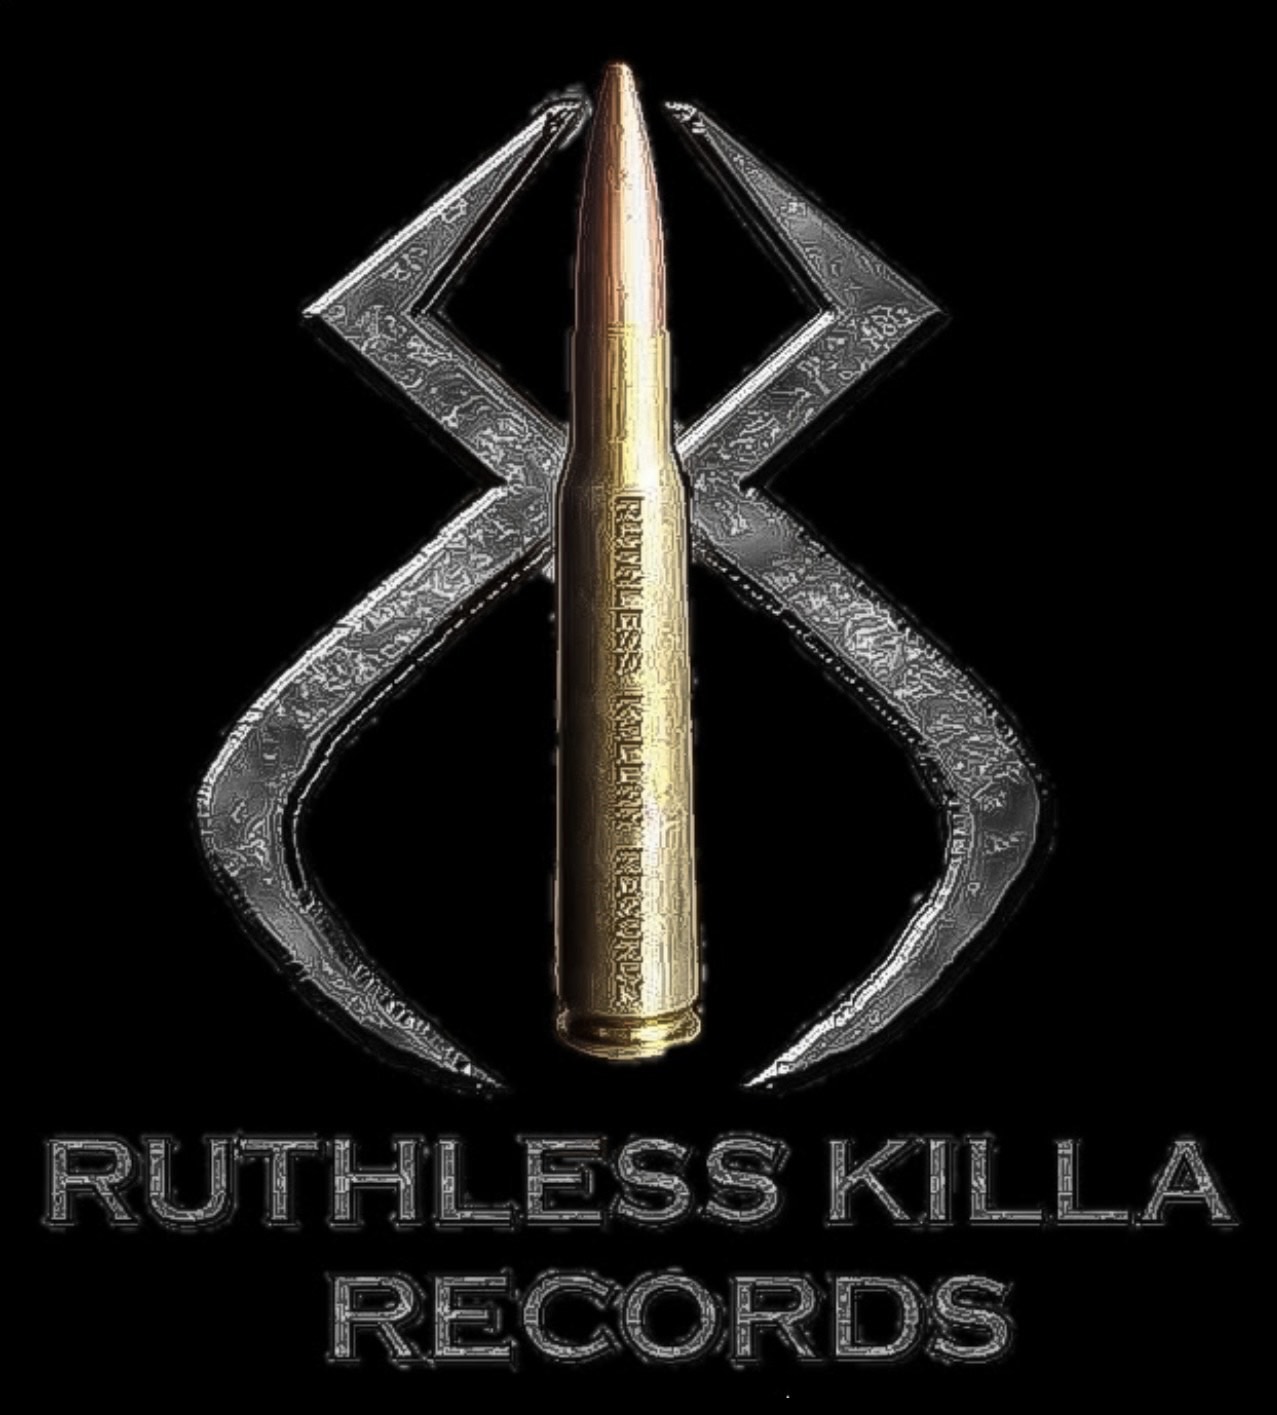 Introducing J.A.G.2 CEO of Ruthless Killa Records